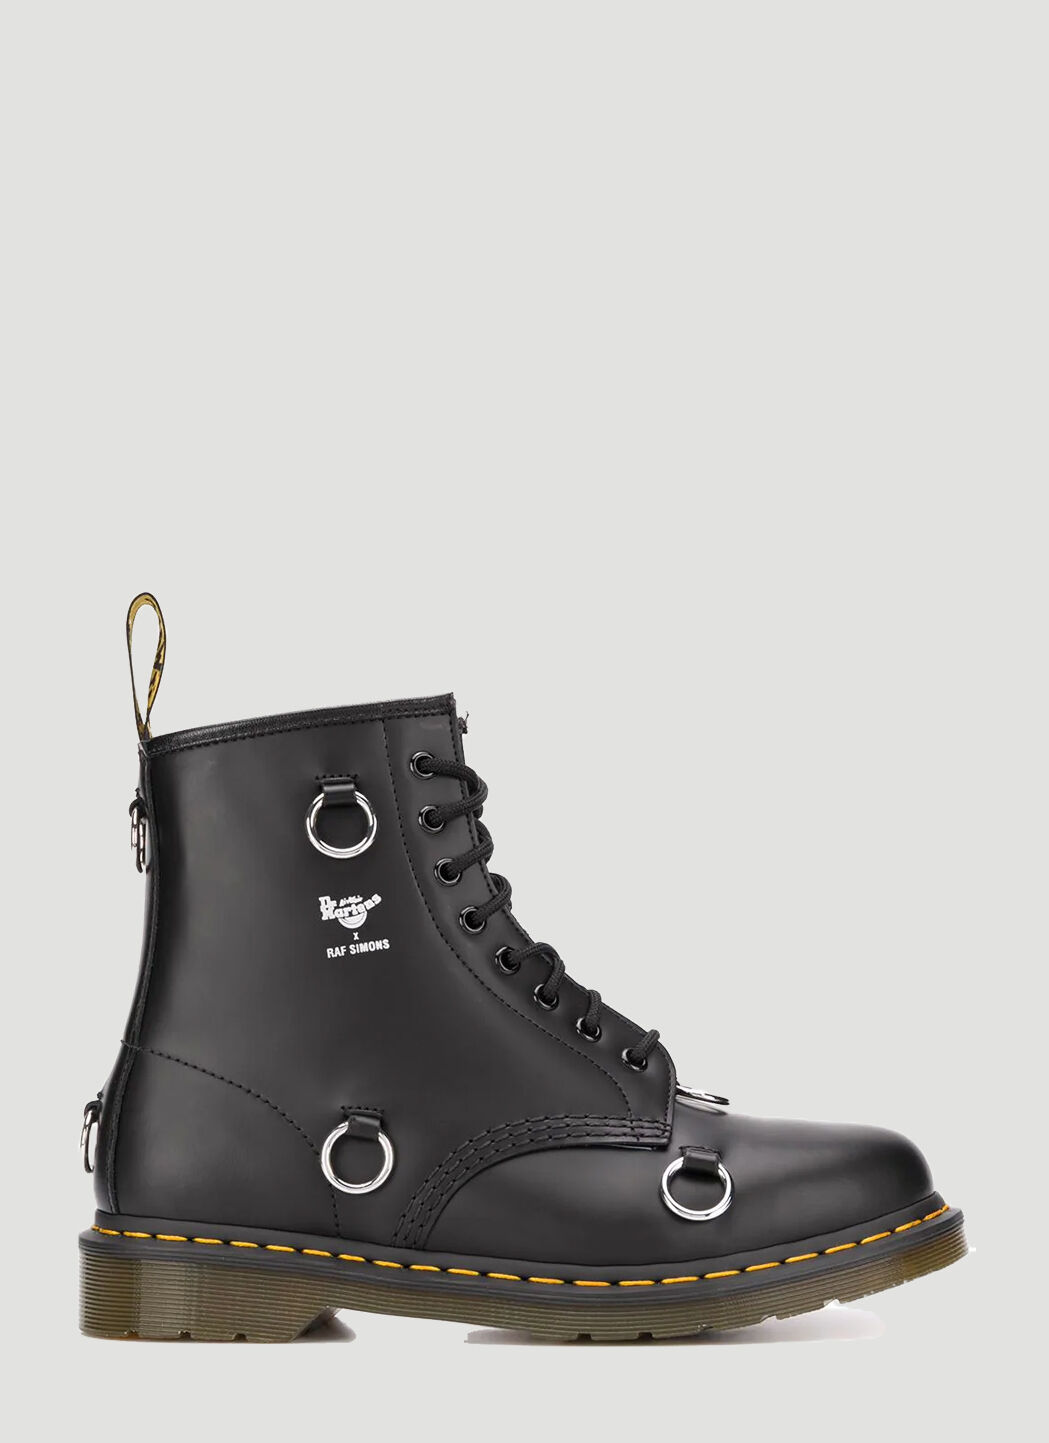 Raf Simons x Fred Perry X Dr. Martens Edition Ring-Embellished Boots ブラック rsf0152002